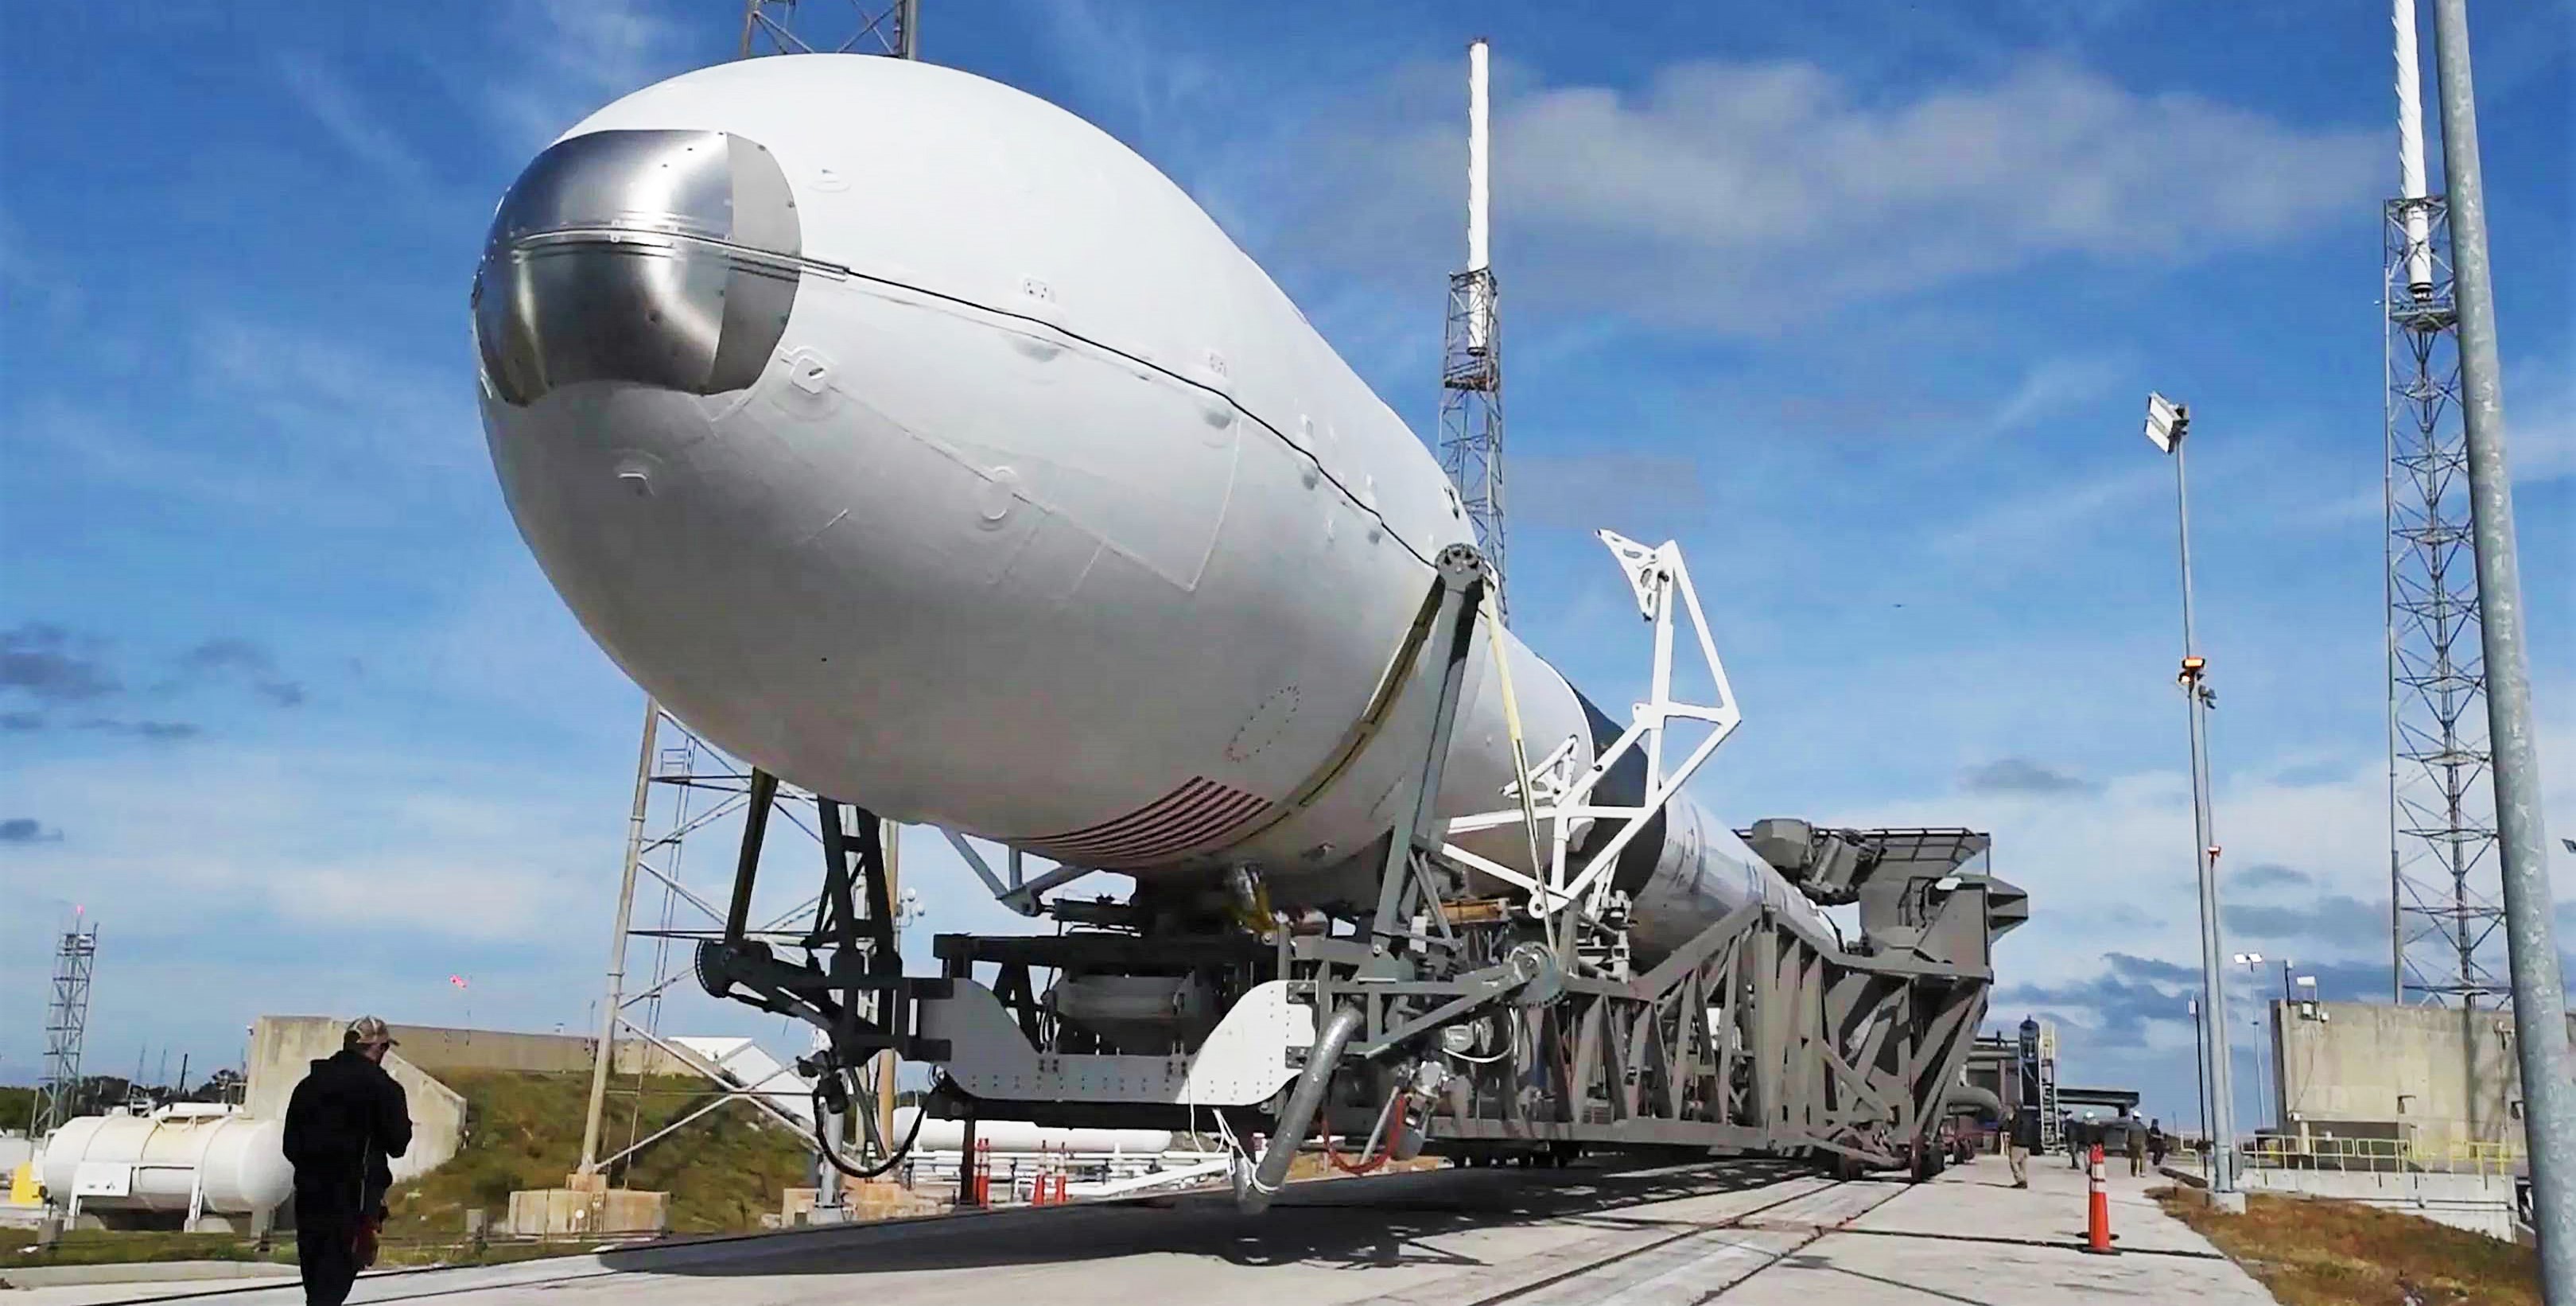 SpaceX on track for US Air Force Falcon 9 mission later this year